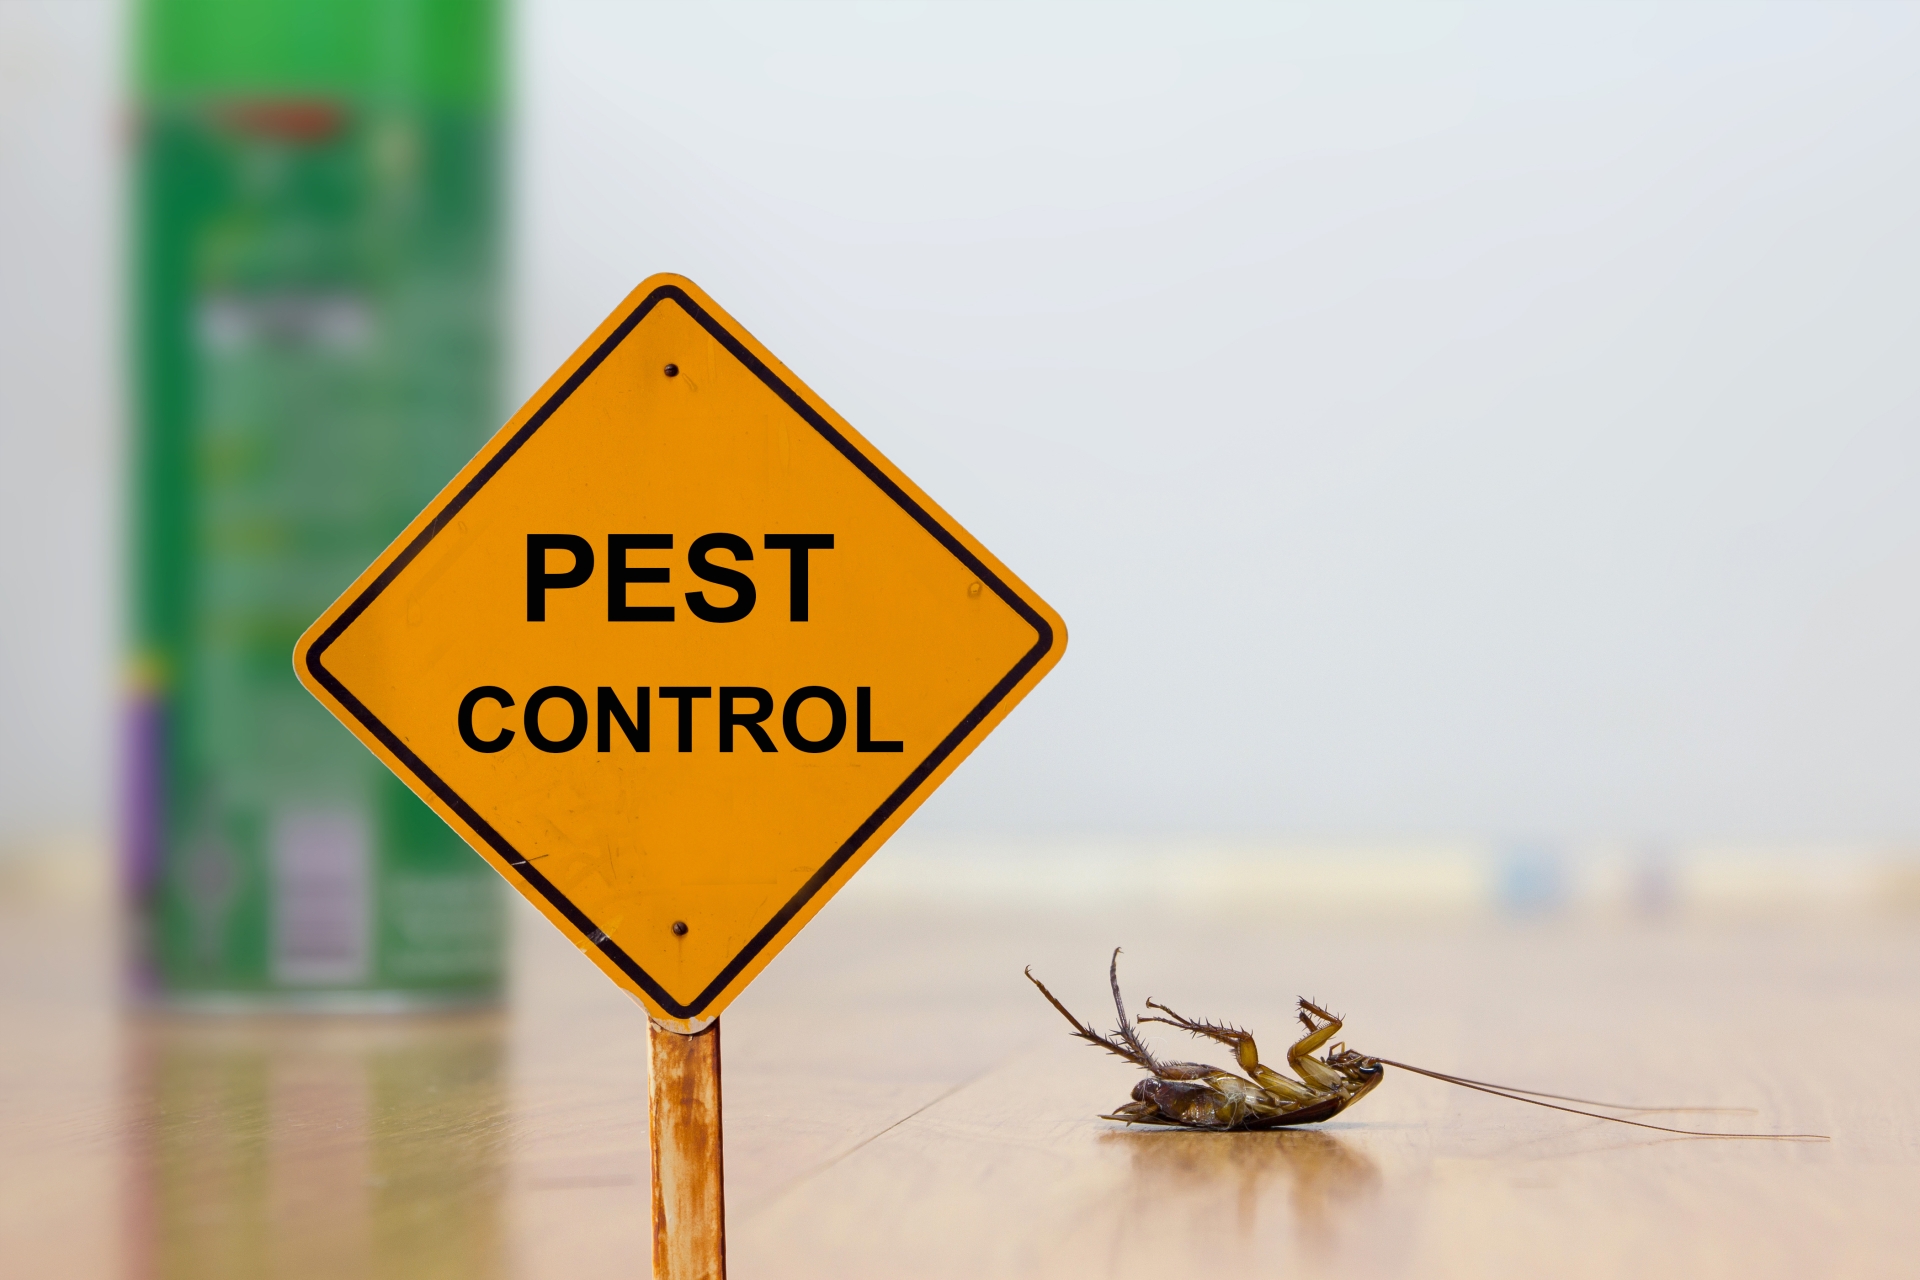 24 Hour Pest Control, Pest Control in Orpington, Chelsfield, Downe, BR6. Call Now 020 8166 9746